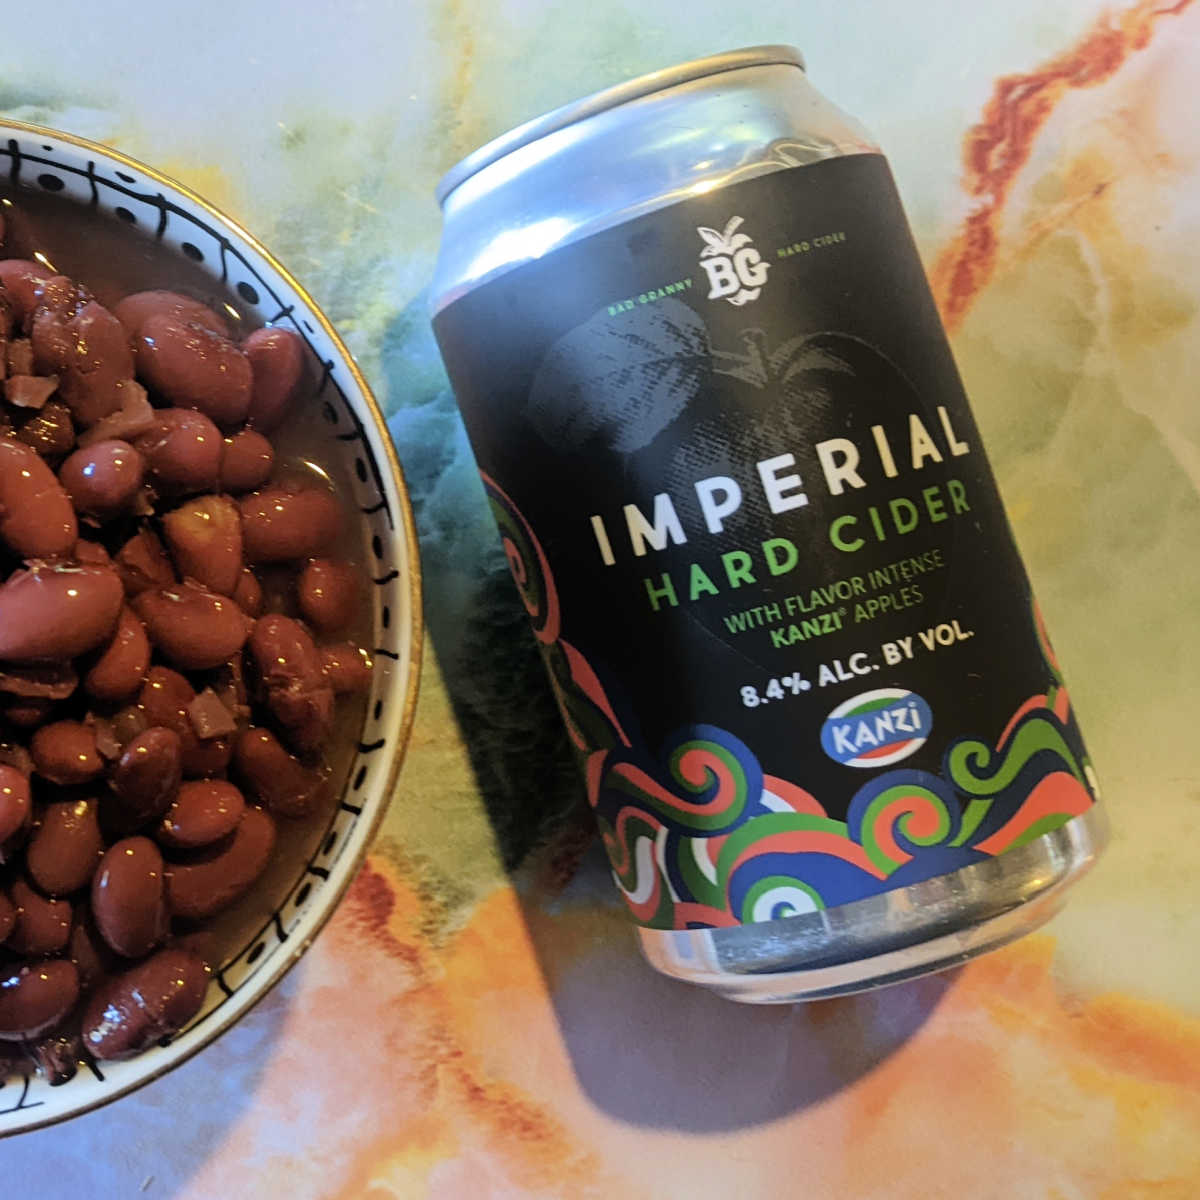 imperial hard cider and beans